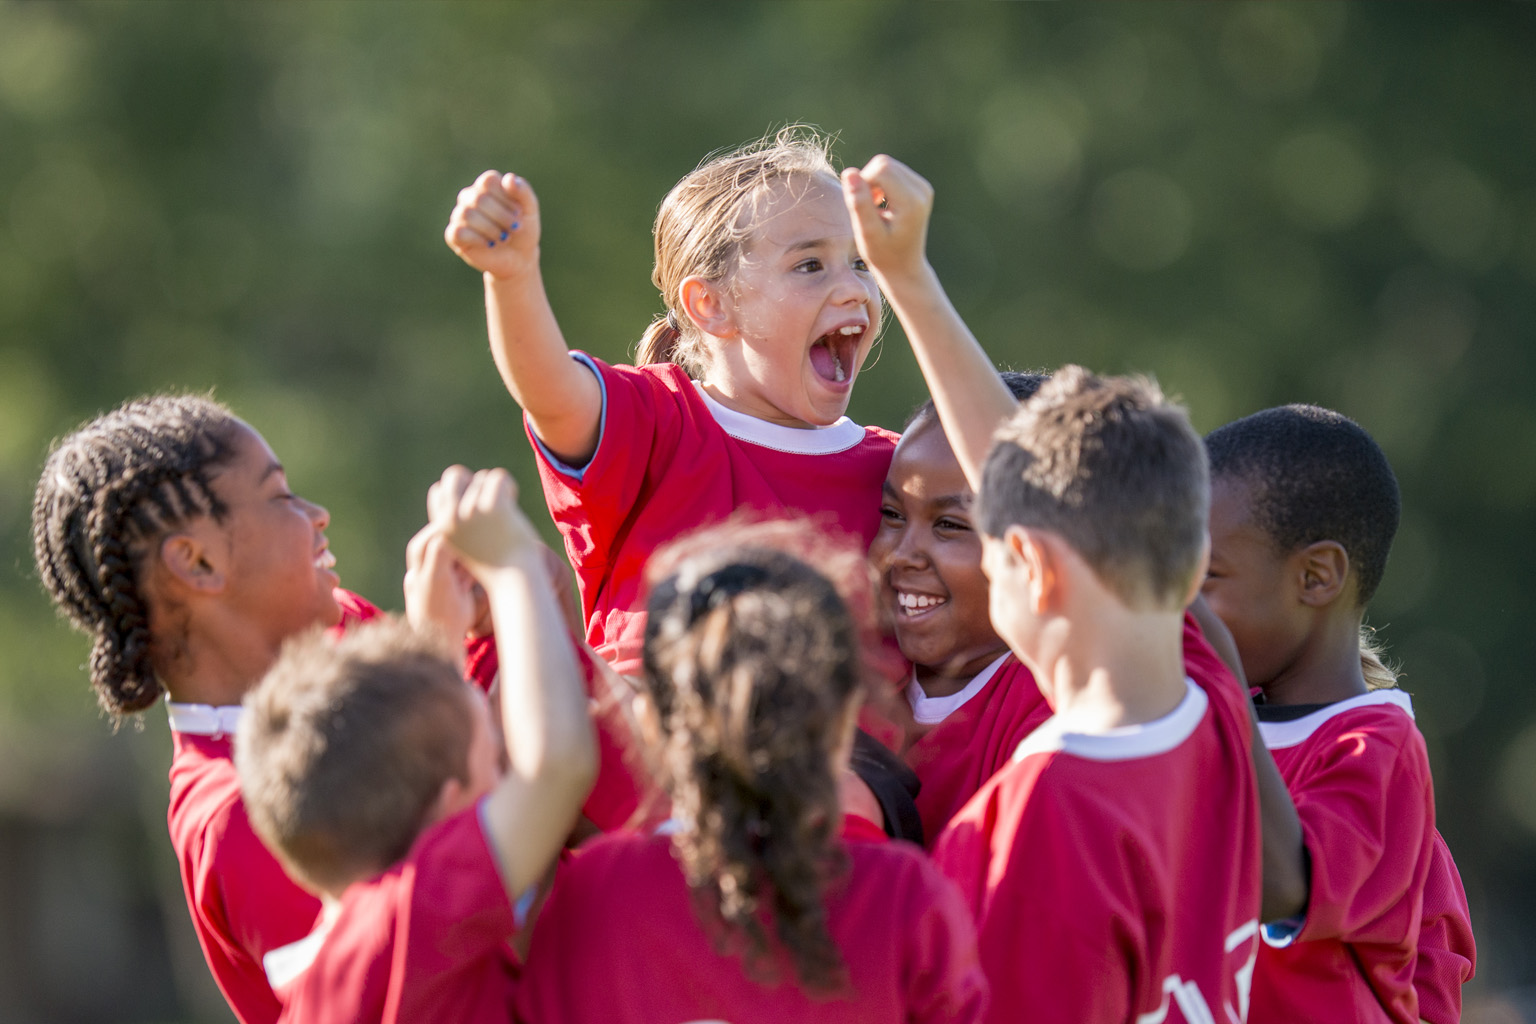 A small girl is lifted up by young teammates in celebration